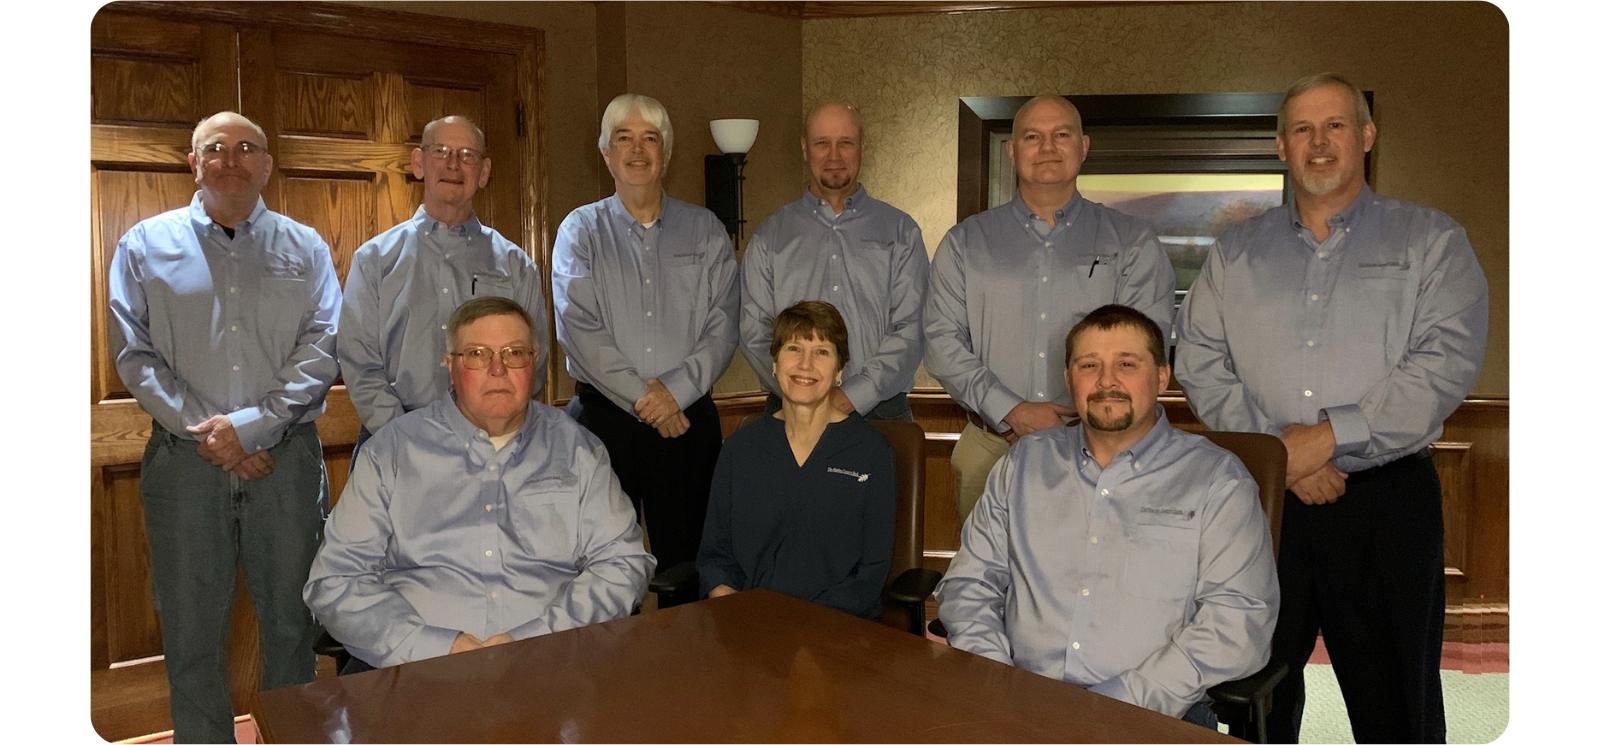 The Maries County Bank Board of Directors Photo